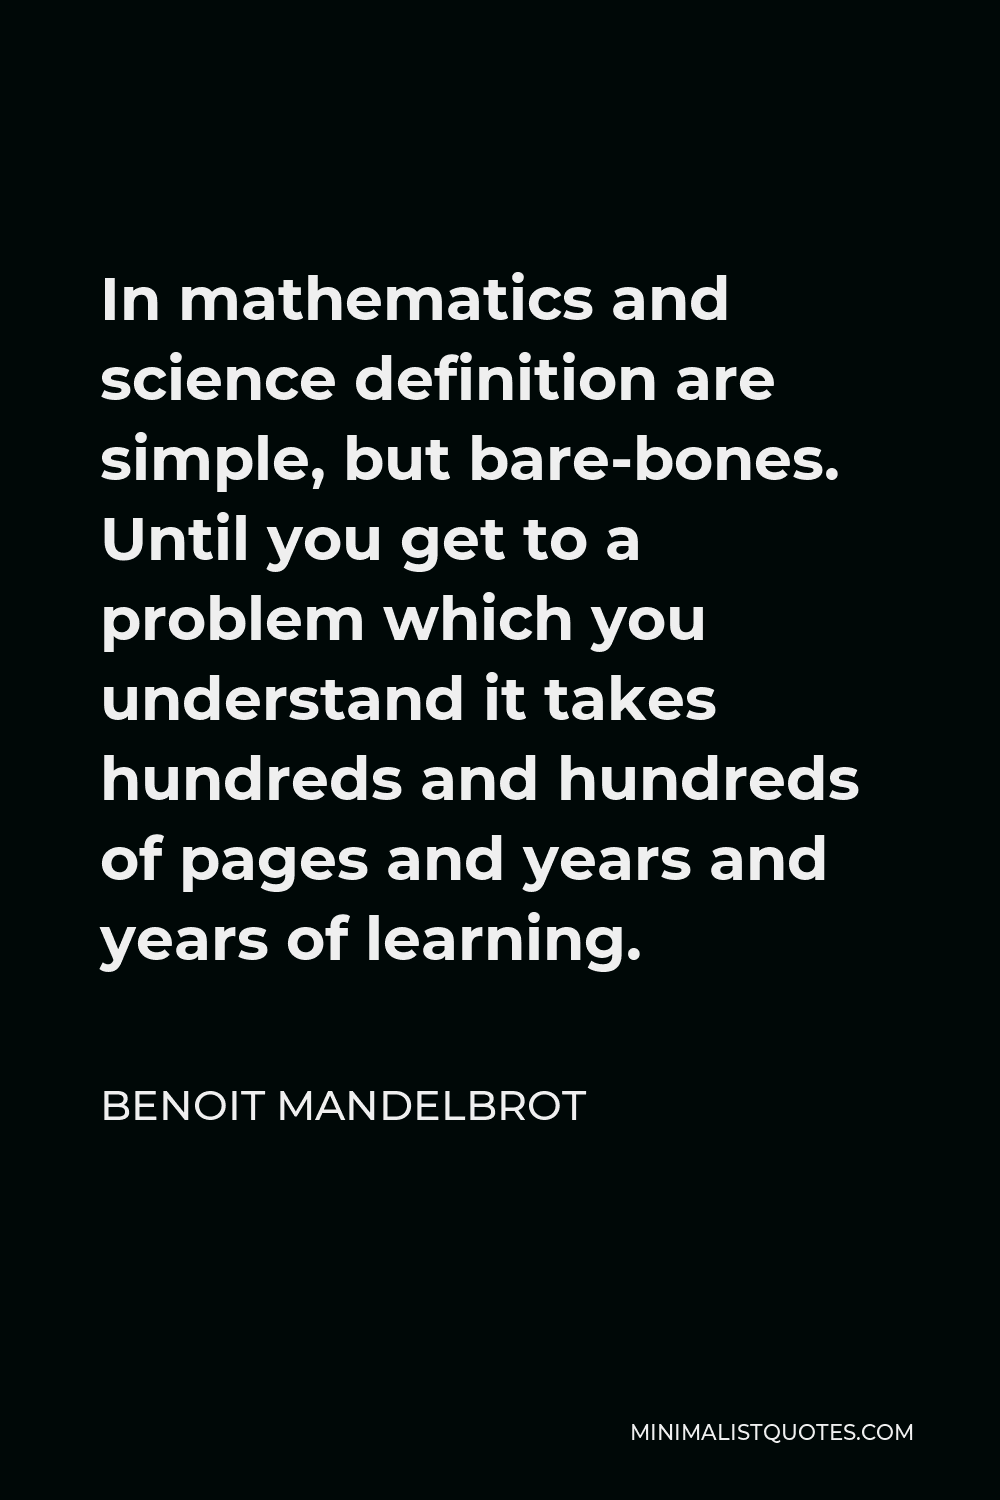 Benoit Mandelbrot Quote - In mathematics and science definition are simple, but bare-bones. Until you get to a problem which you understand it takes hundreds and hundreds of pages and years and years of learning.